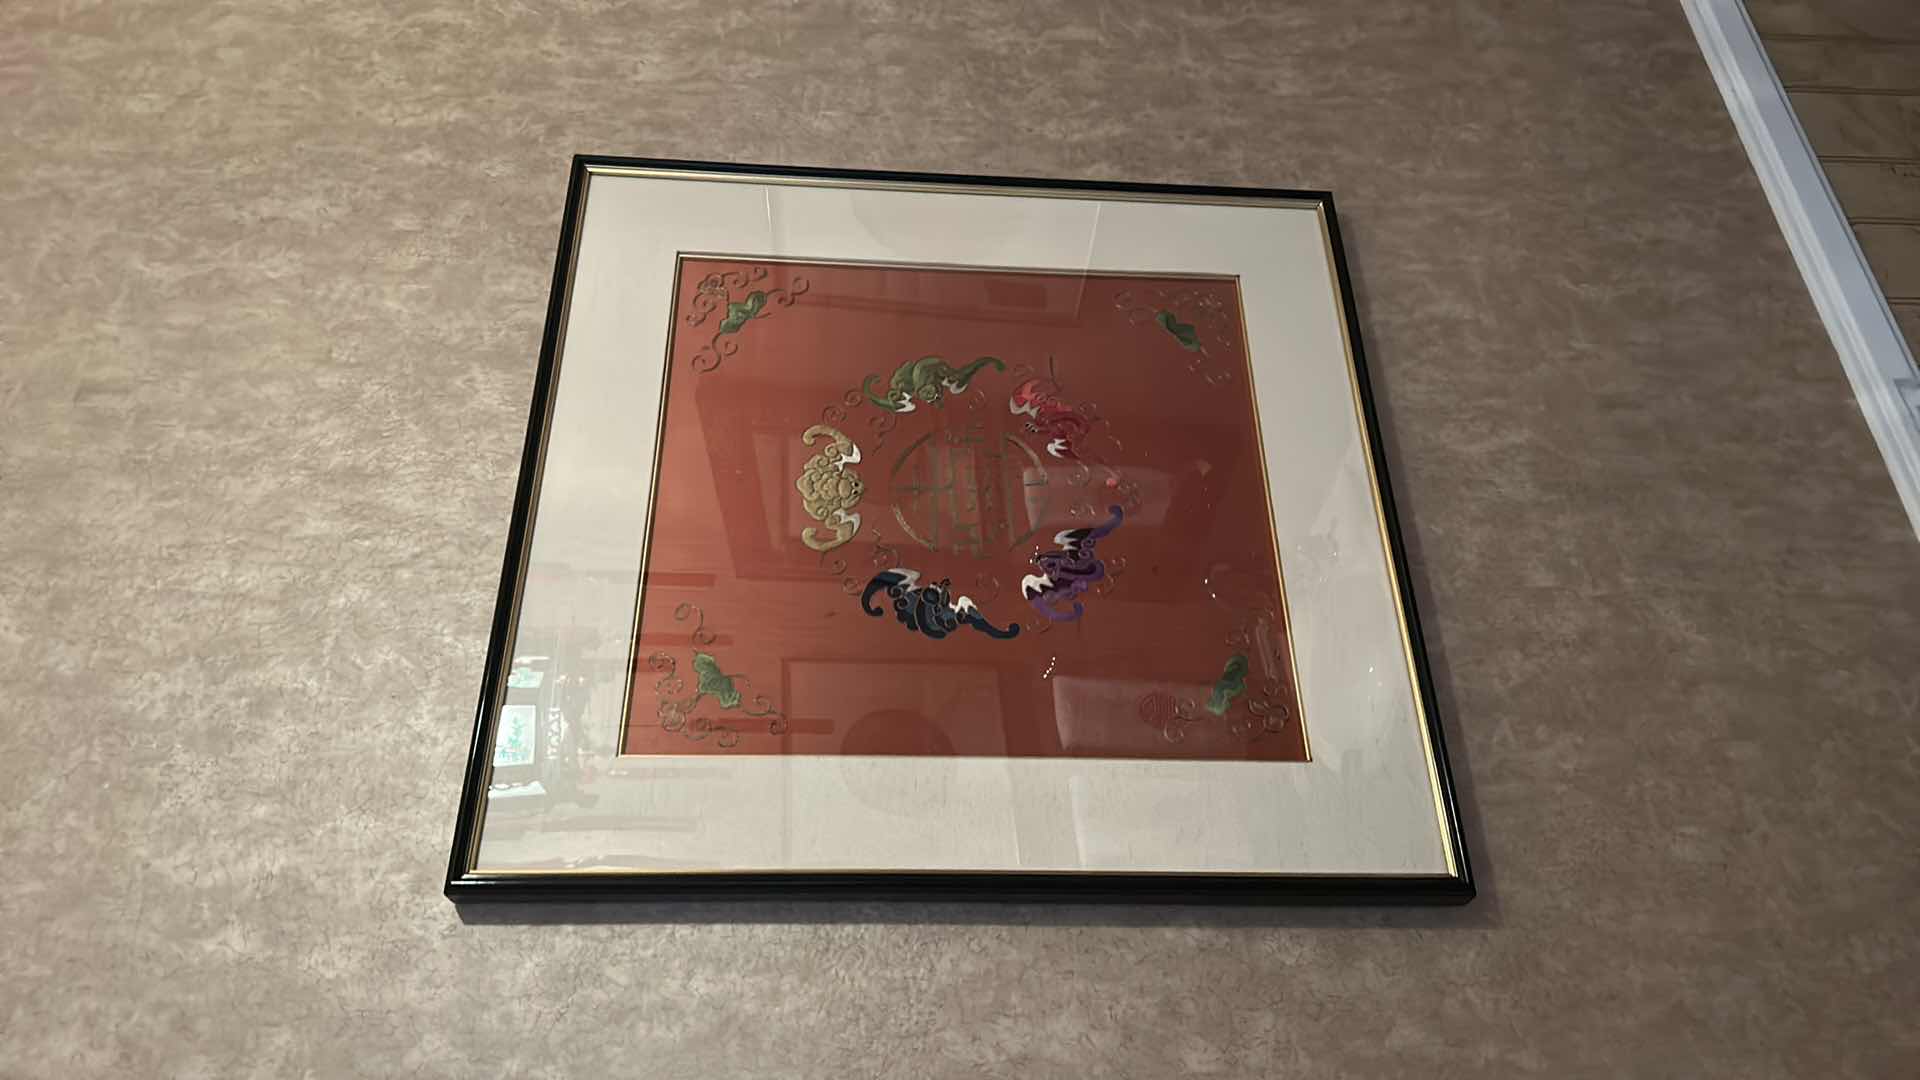 Photo 7 of ANTIQUE CHINESE TEXTILE FABRIC, SILK WITH SILK THREAD HAND EMBROIDERY ARTWORK FRAMED 18" X 18"